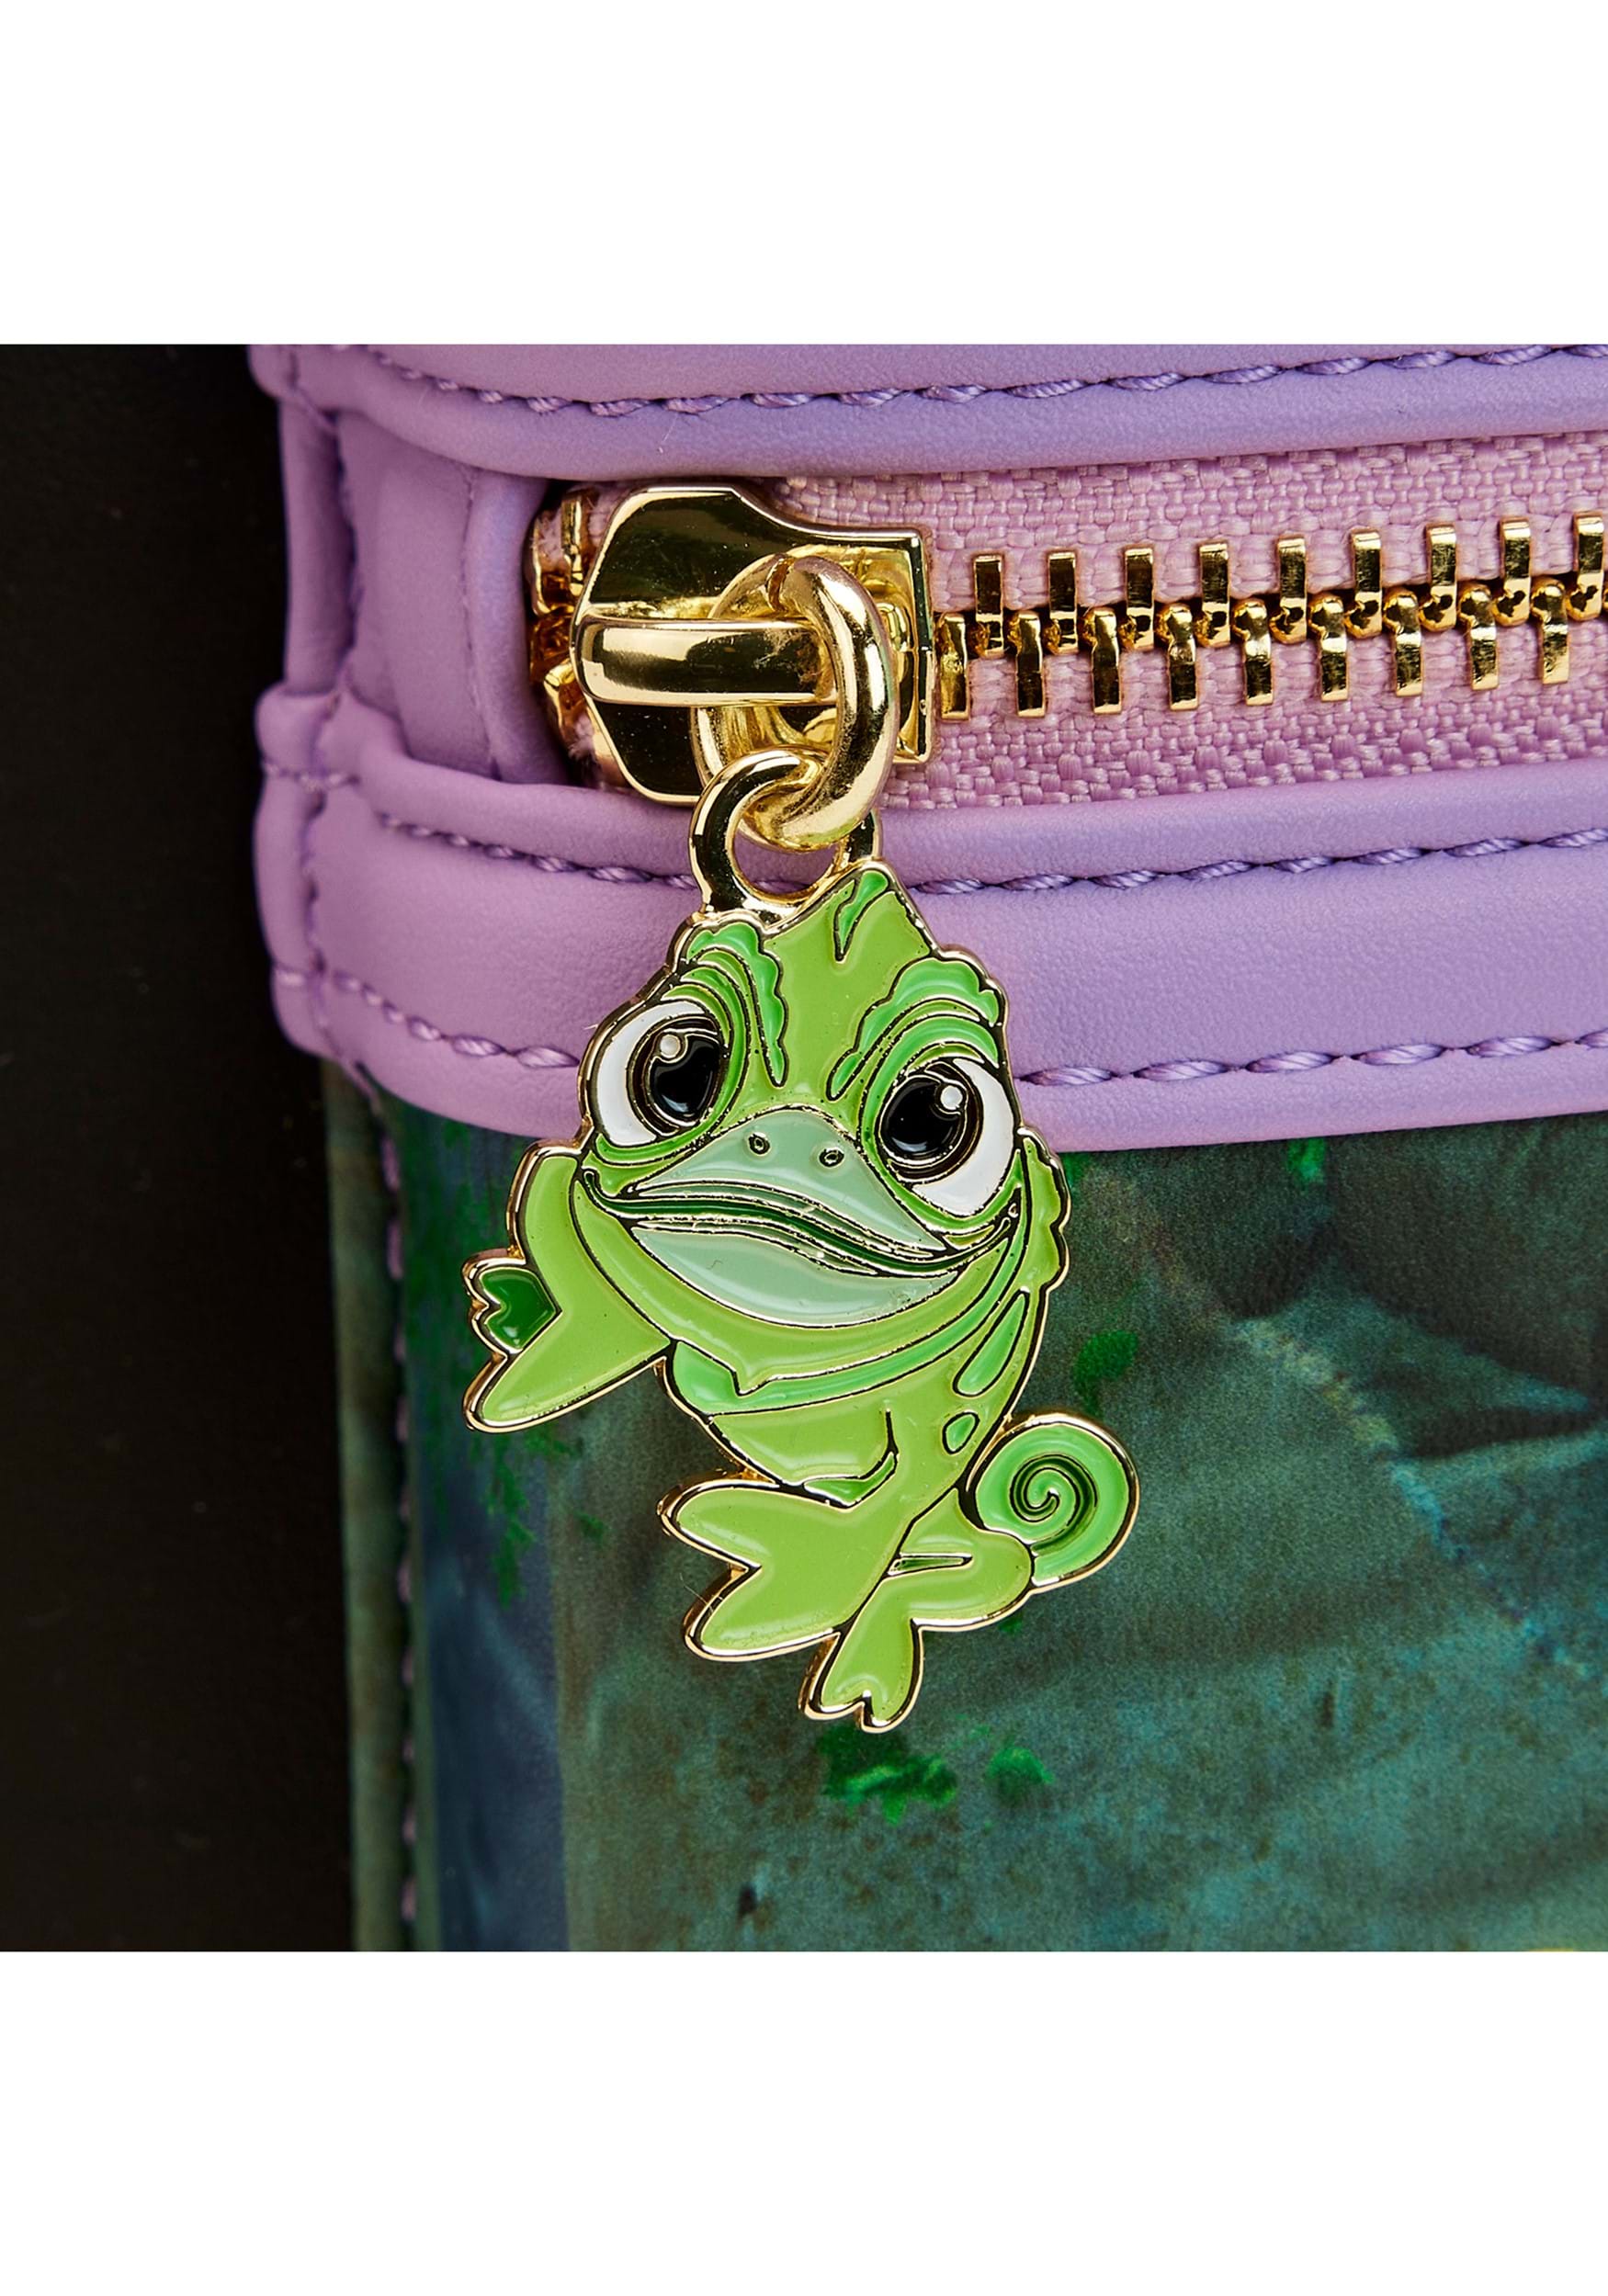 Loungefly, Bags, Loungefly Disney Tangled Pascal Mini Backpack Bag